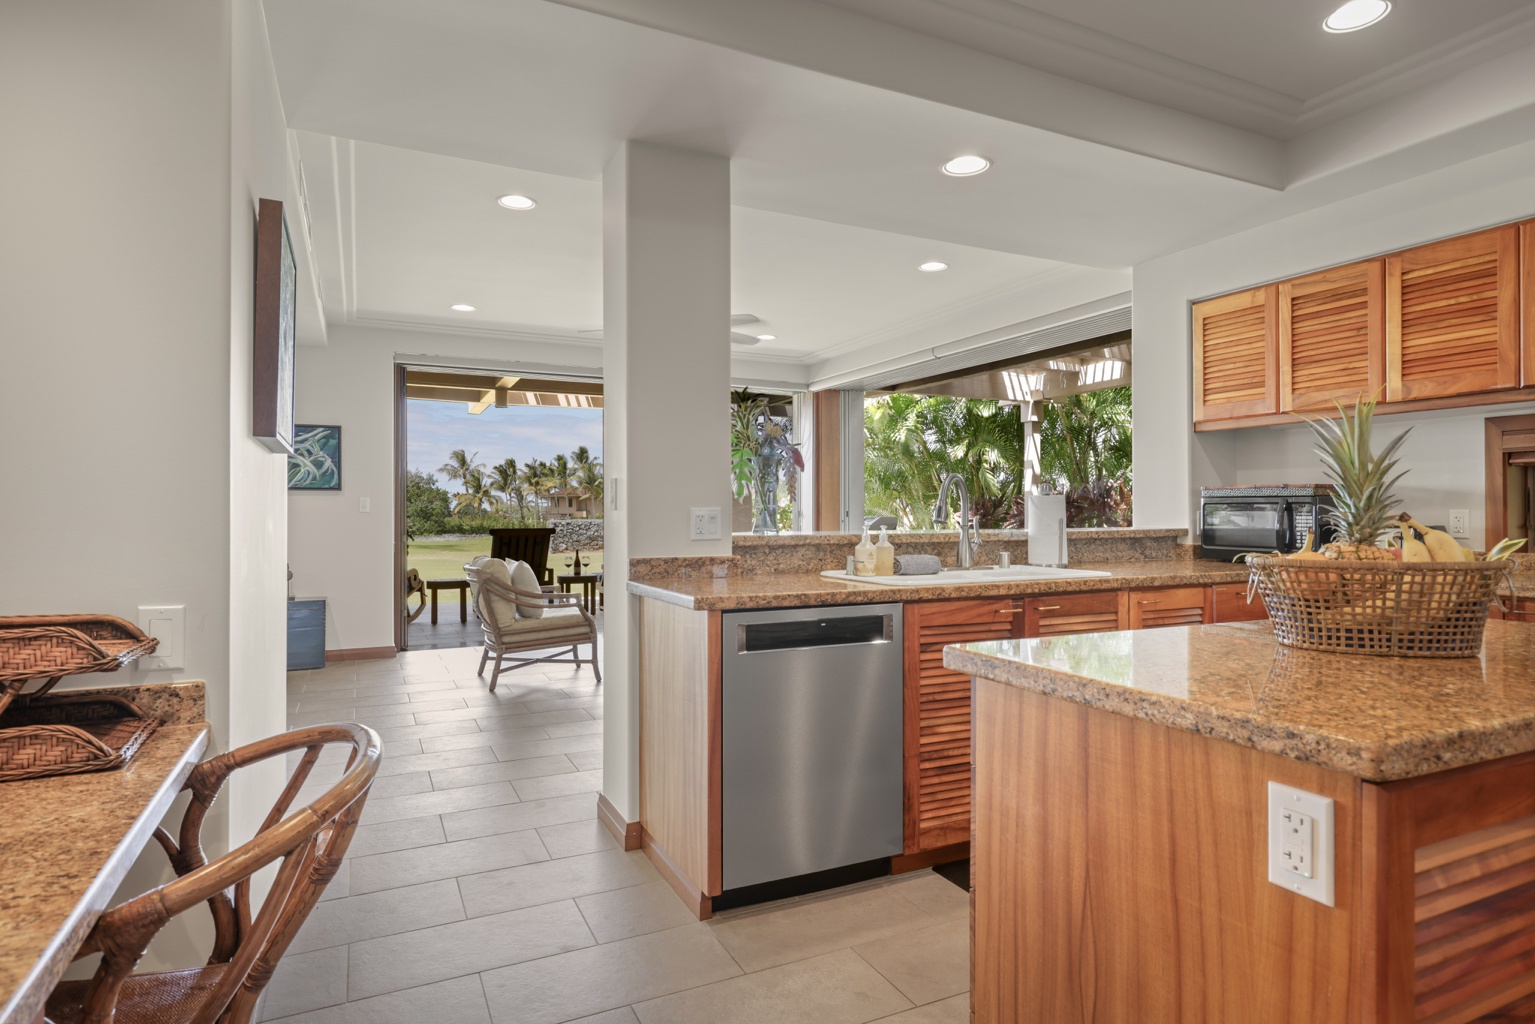 Kailua Kona Vacation Rentals, 3BD Golf Villa (3101) at Four Seasons Resort at Hualalai - Meal prep is a breeze in the fully-equipped kitchen with stainless steel appliances.